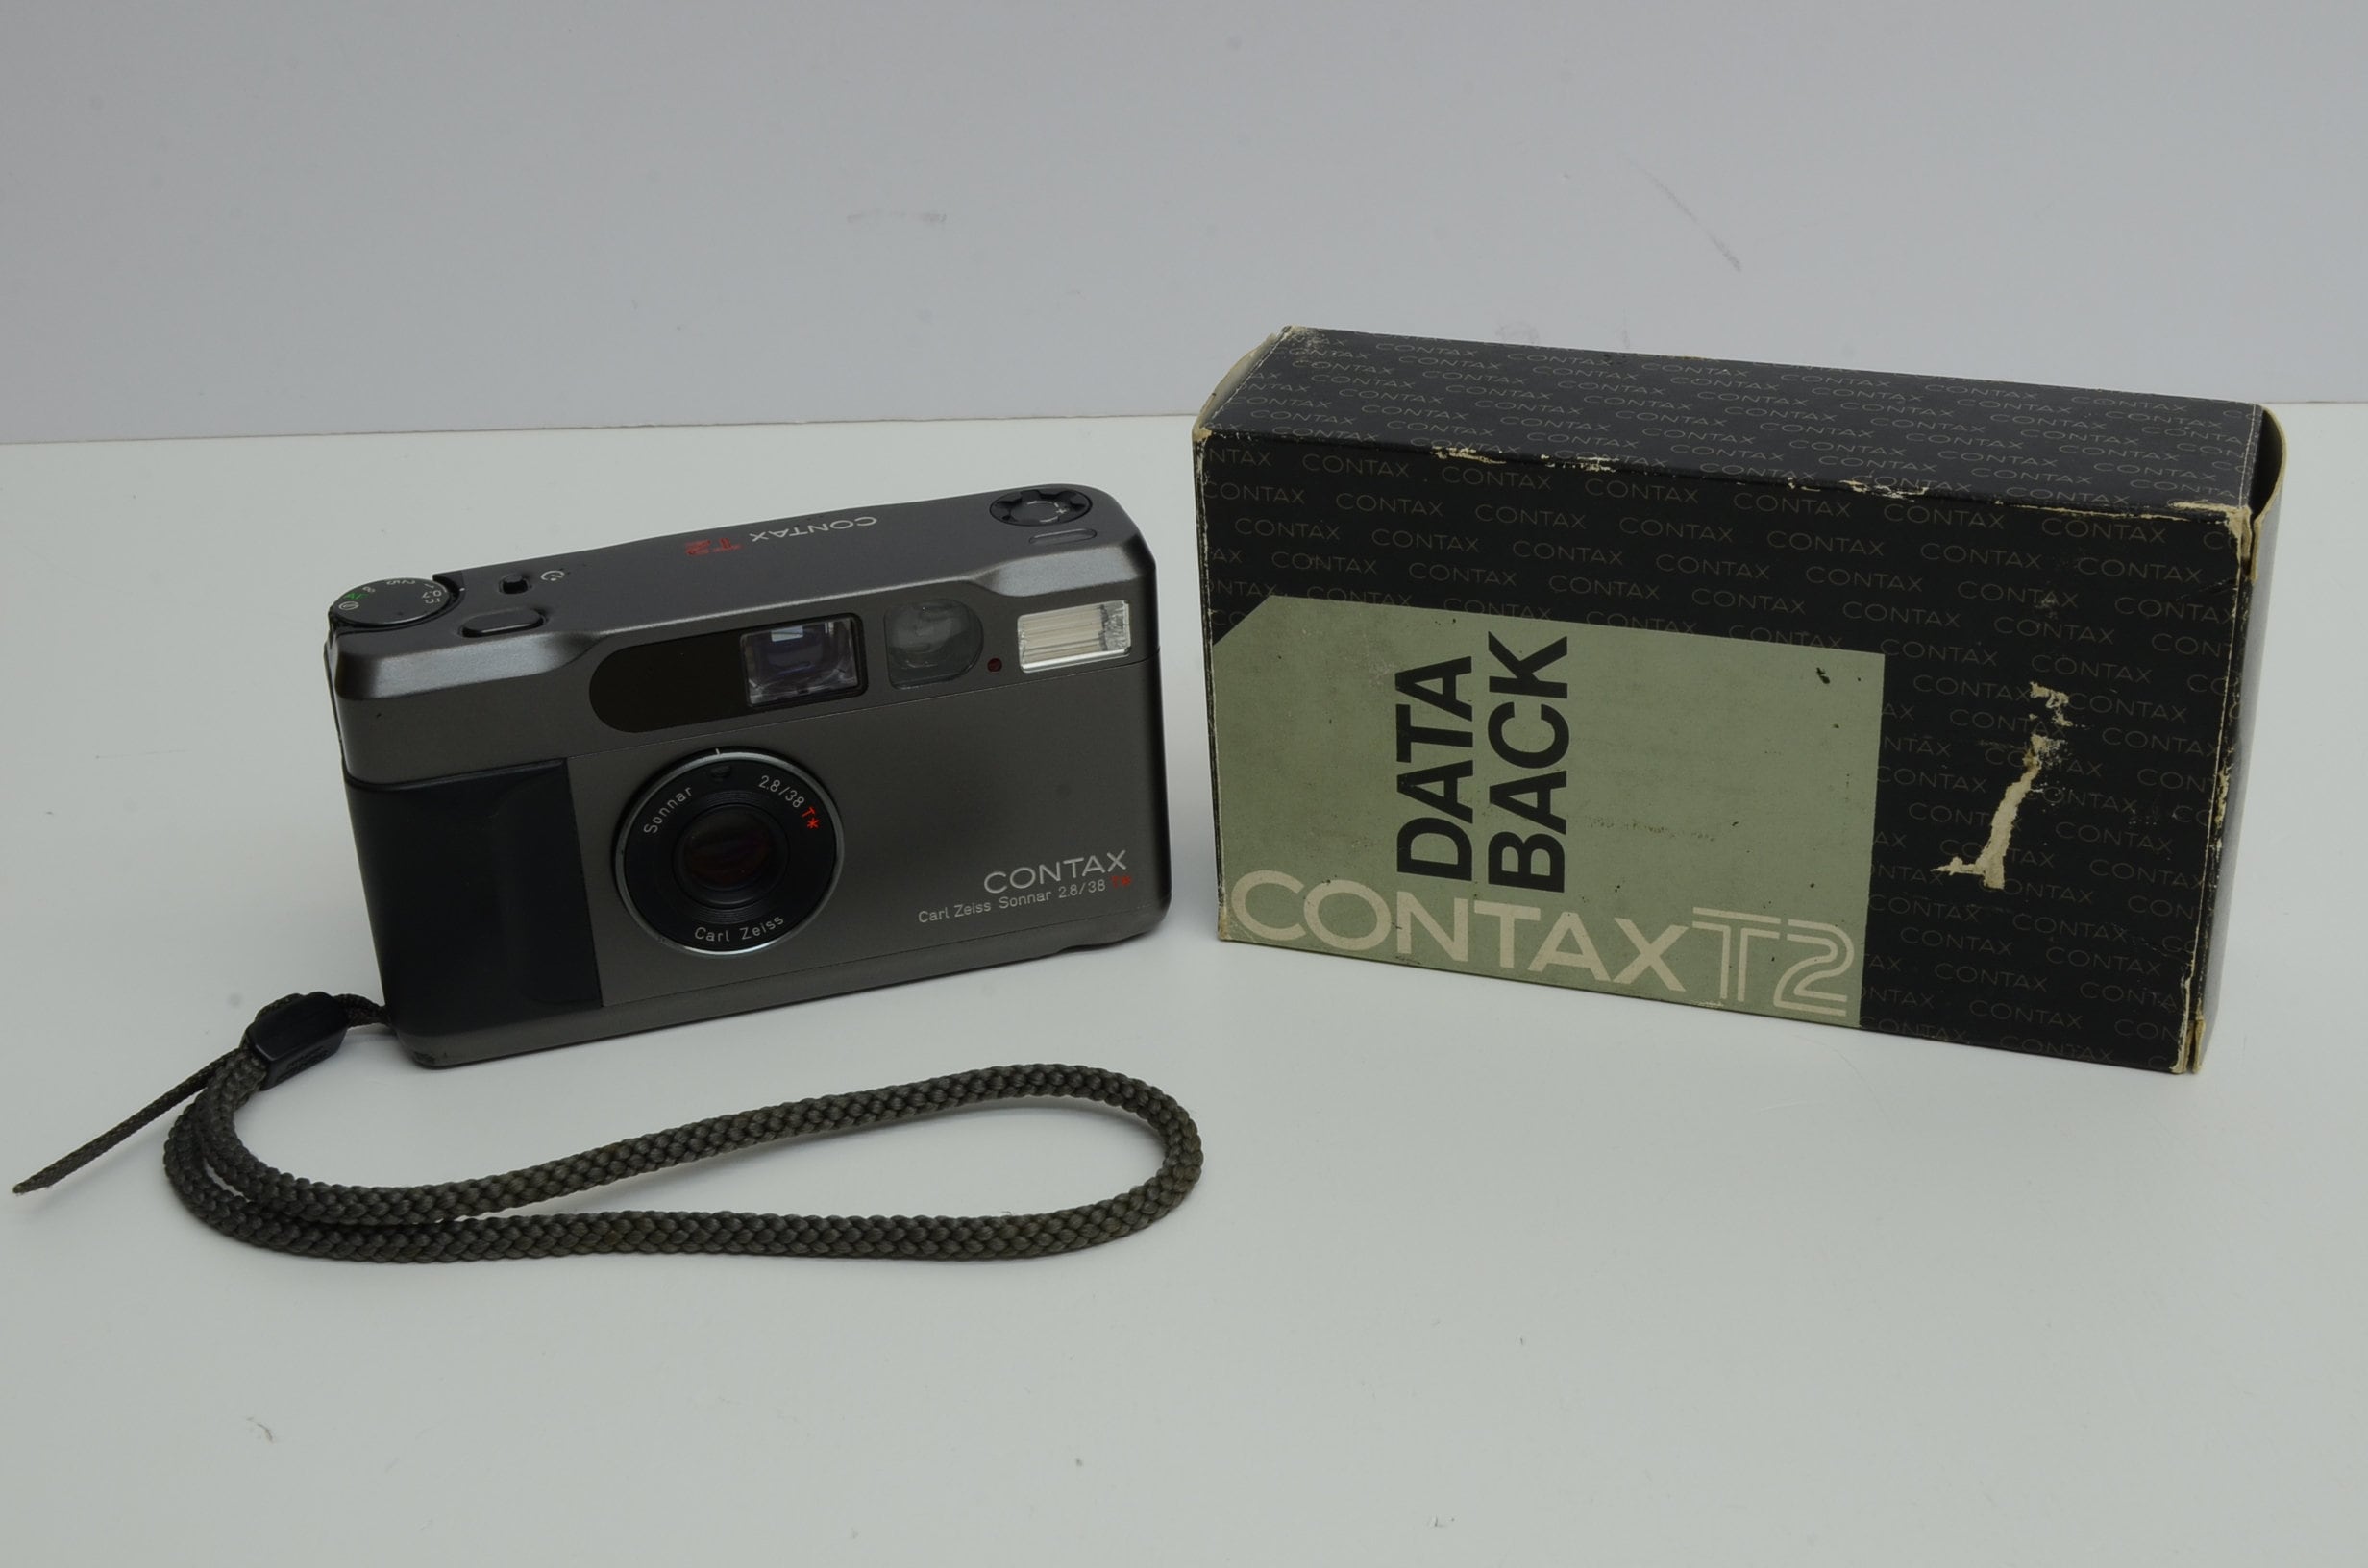 Authentic Contax T2 Camera Autofocus Carl Zeiss - Etsy Finland